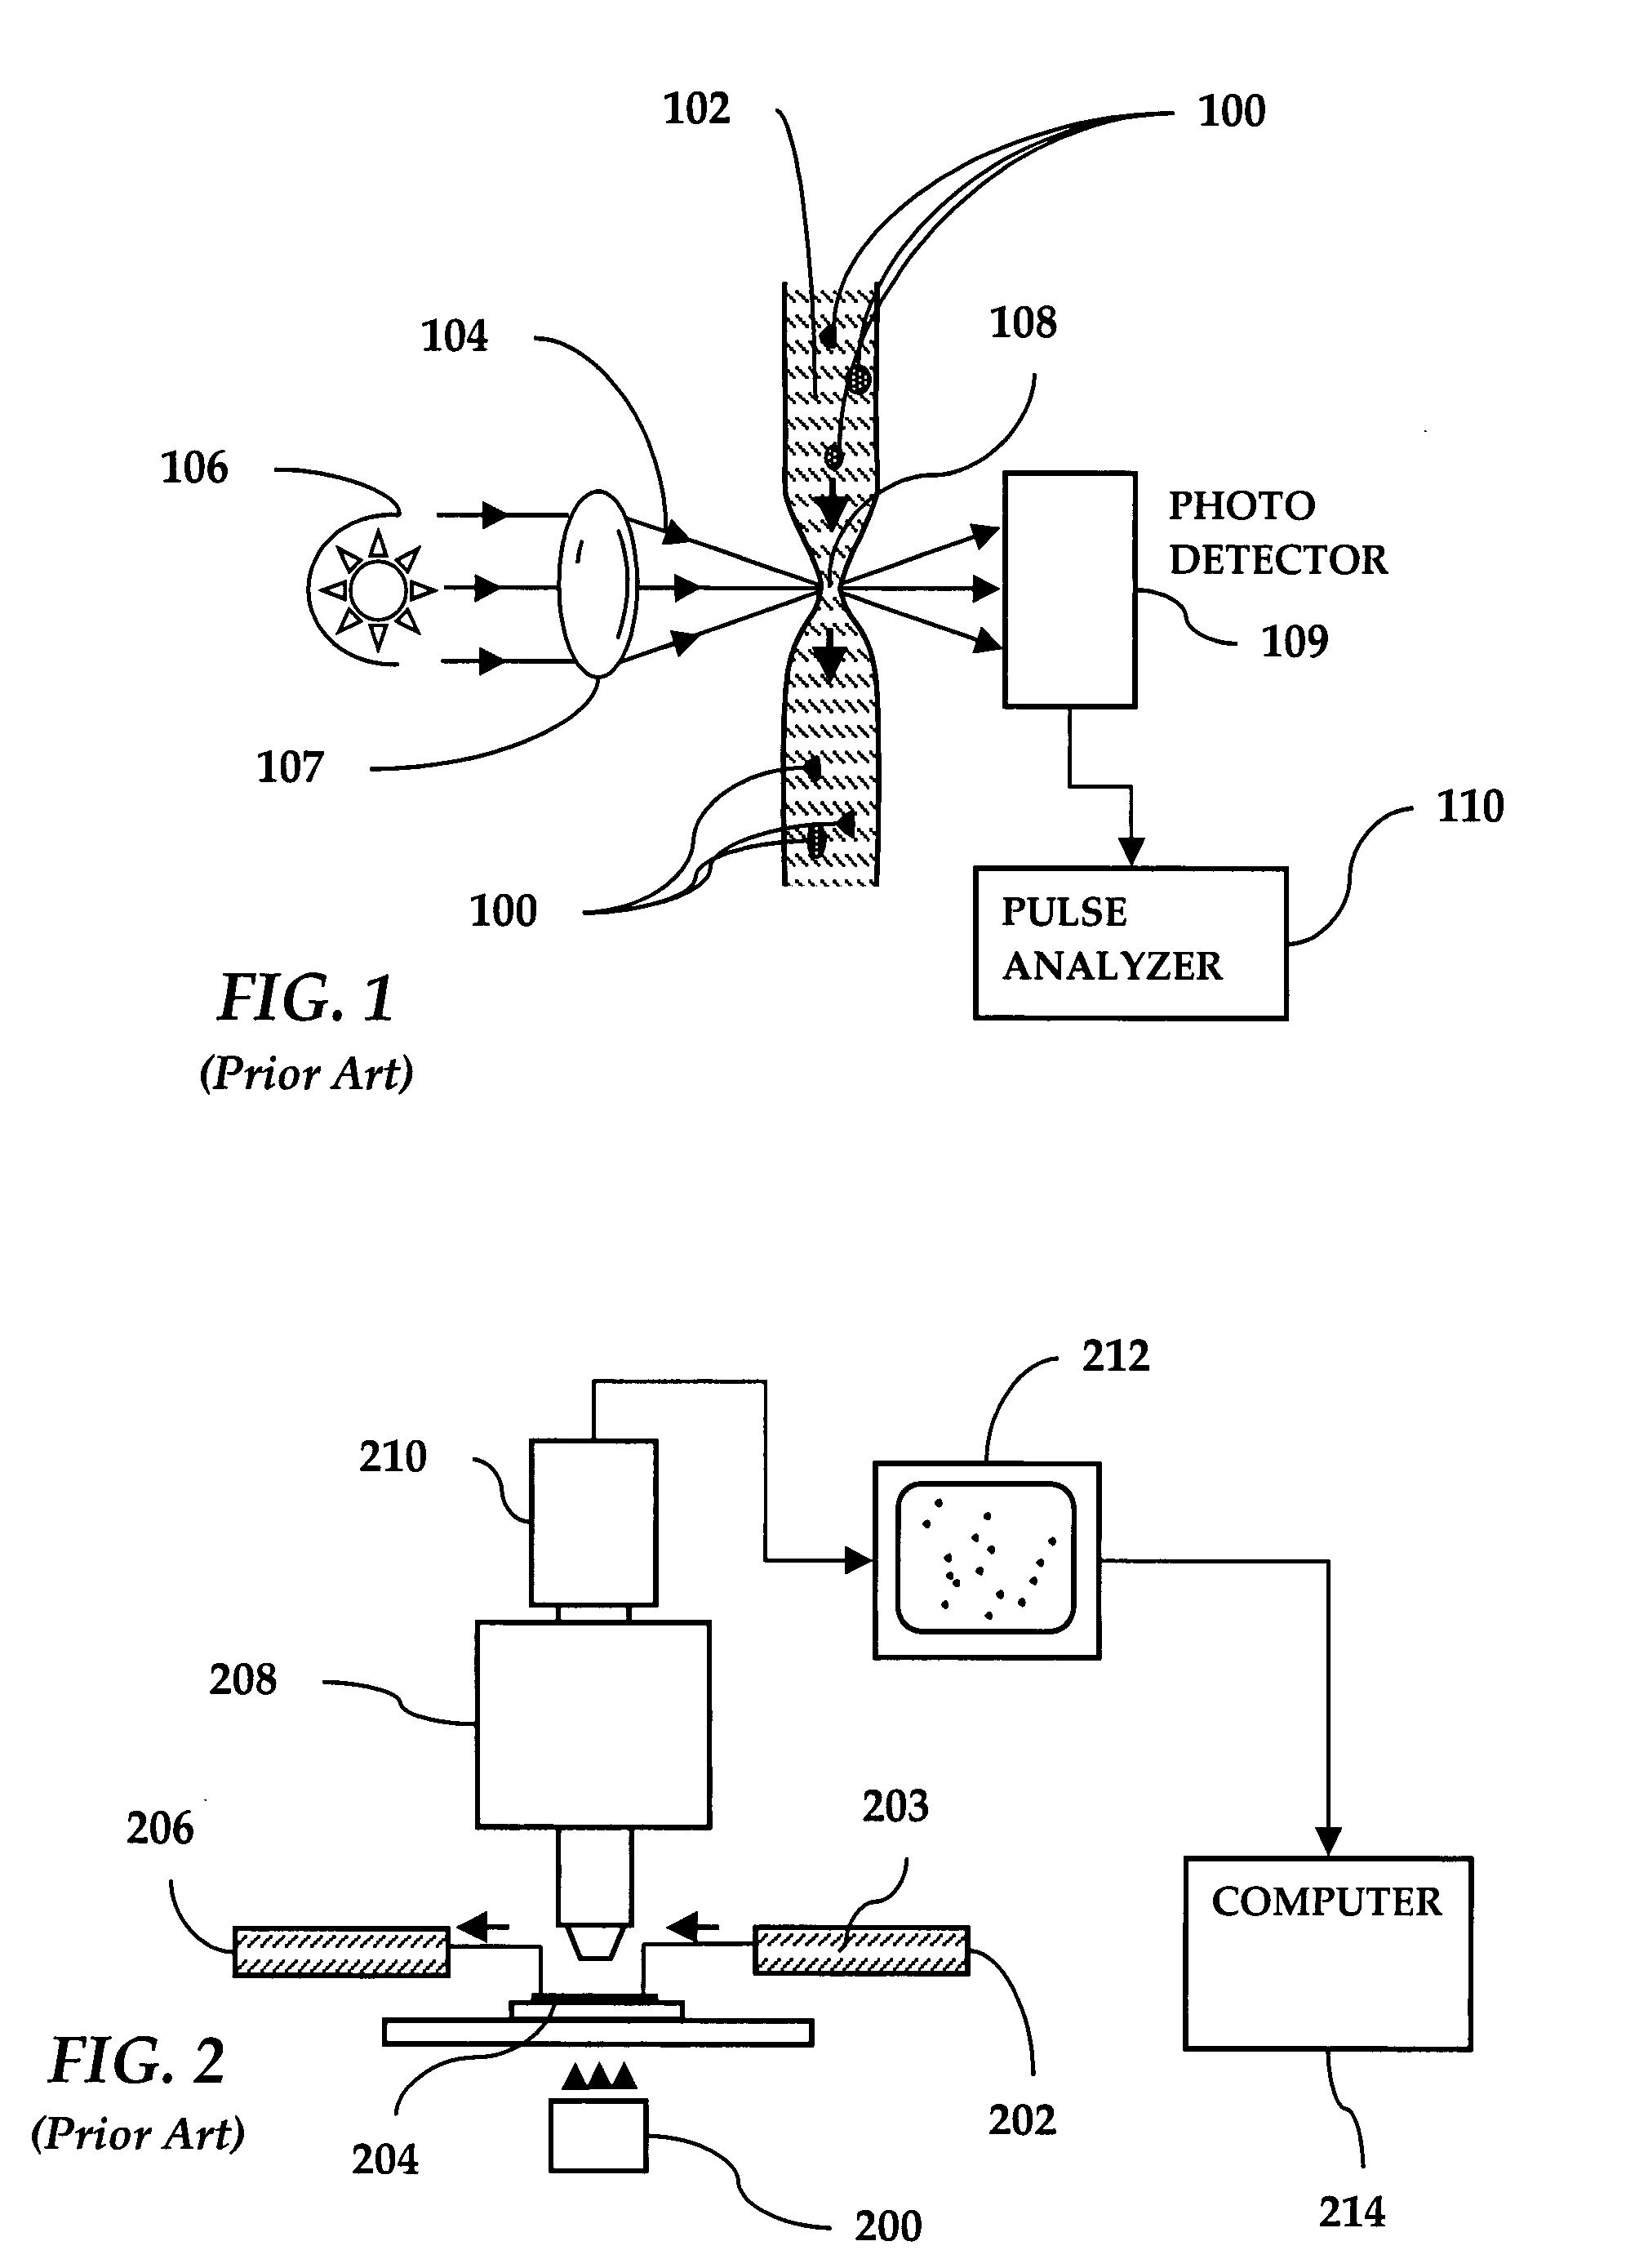 Method and Apparatus for Analyzing Particles in a Fluid